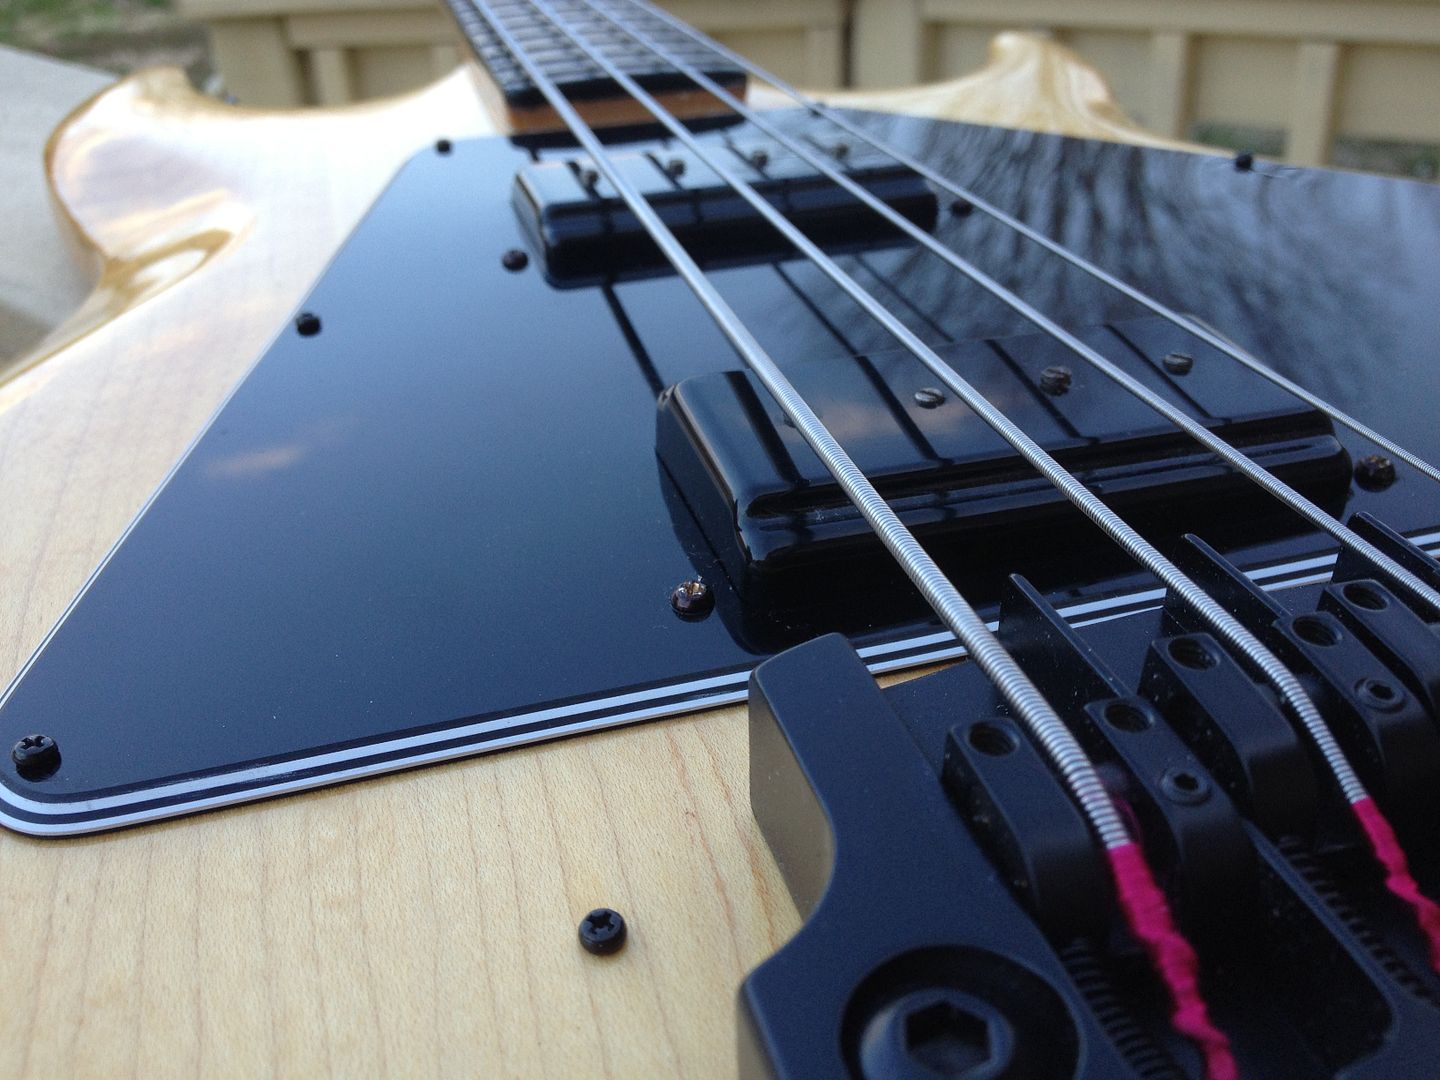 Gibson ripper bass serial numbers